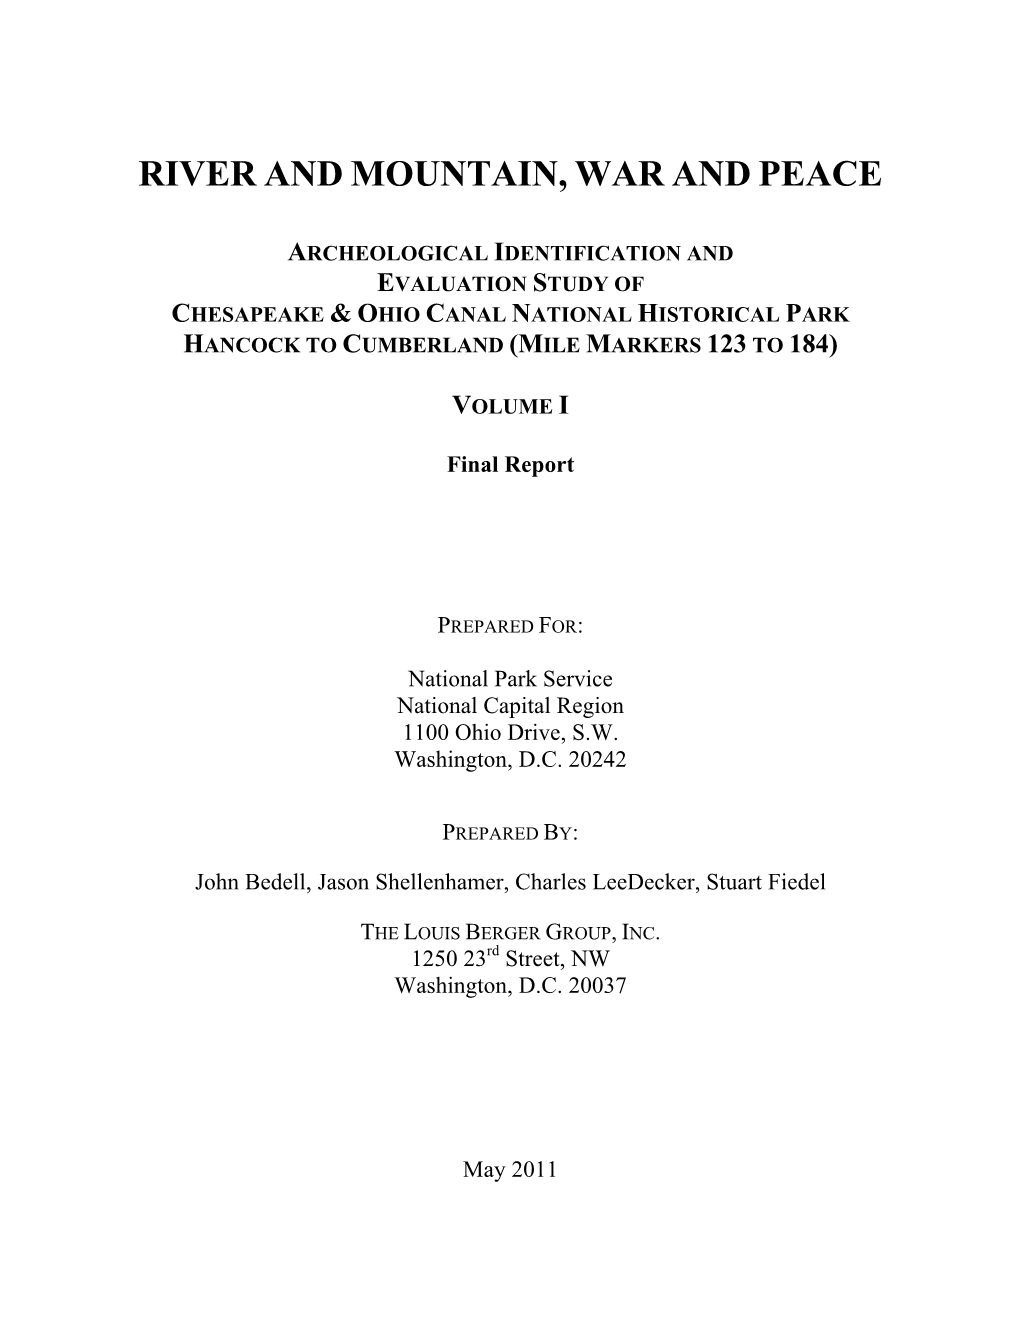 River and Mountain, War and Peace